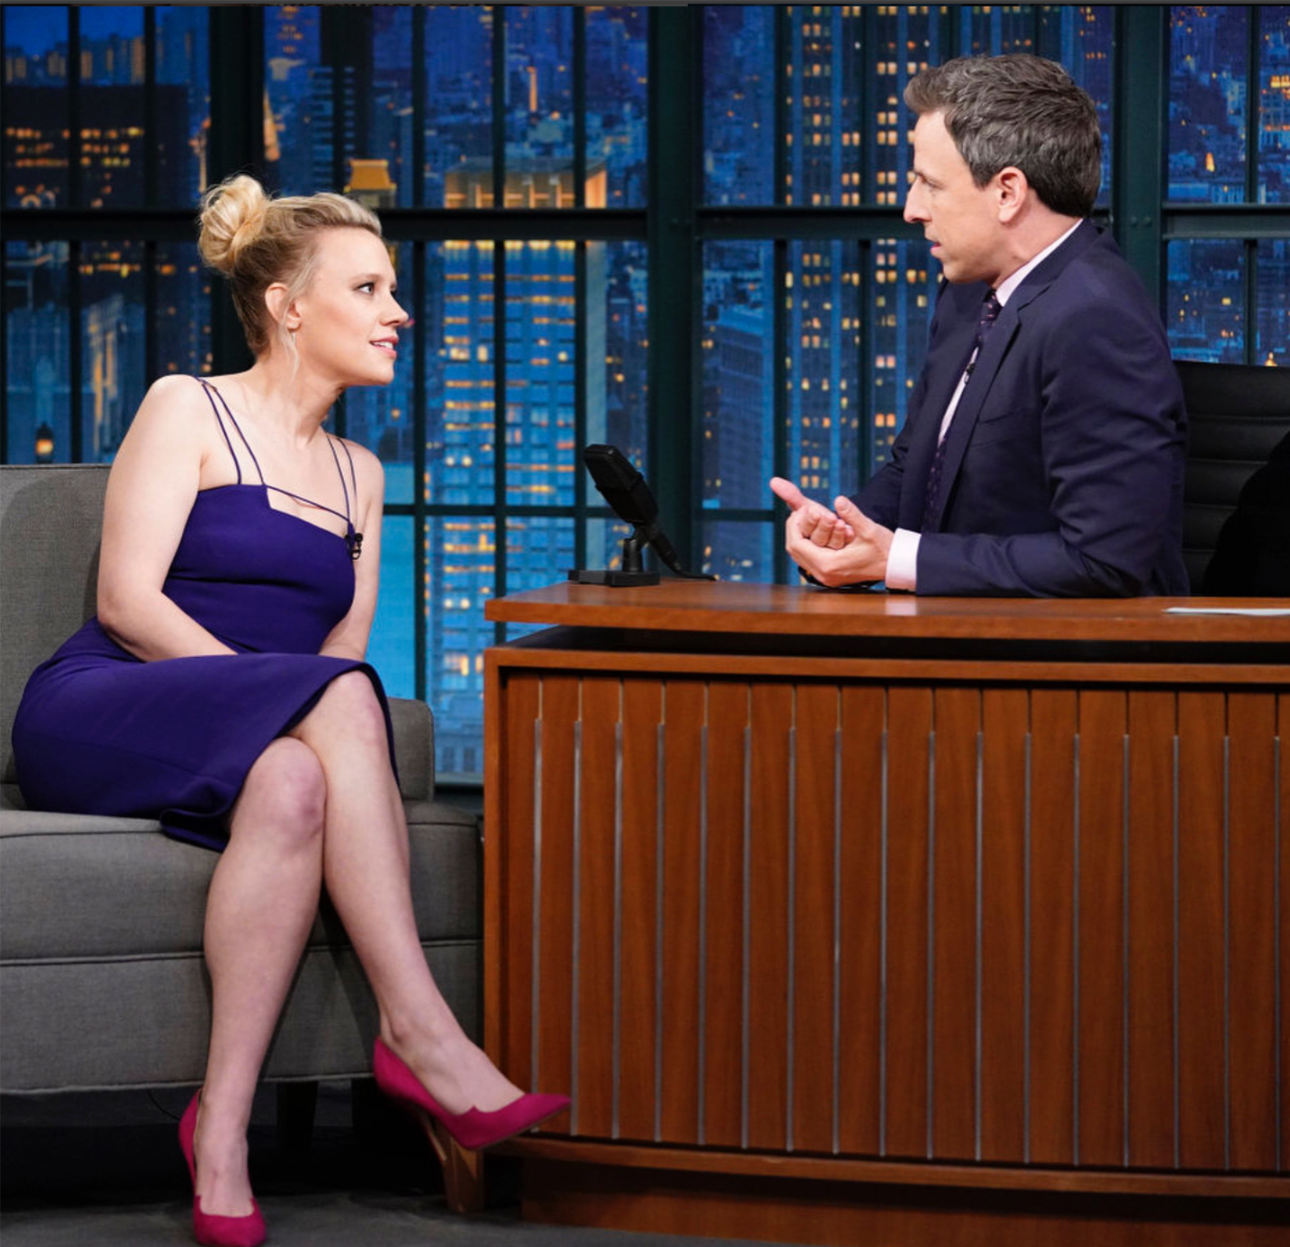 ENTITY discusses Famous vegans that will surprise you. Photo of Kate McKinnon interviewed by Seth Meyers.